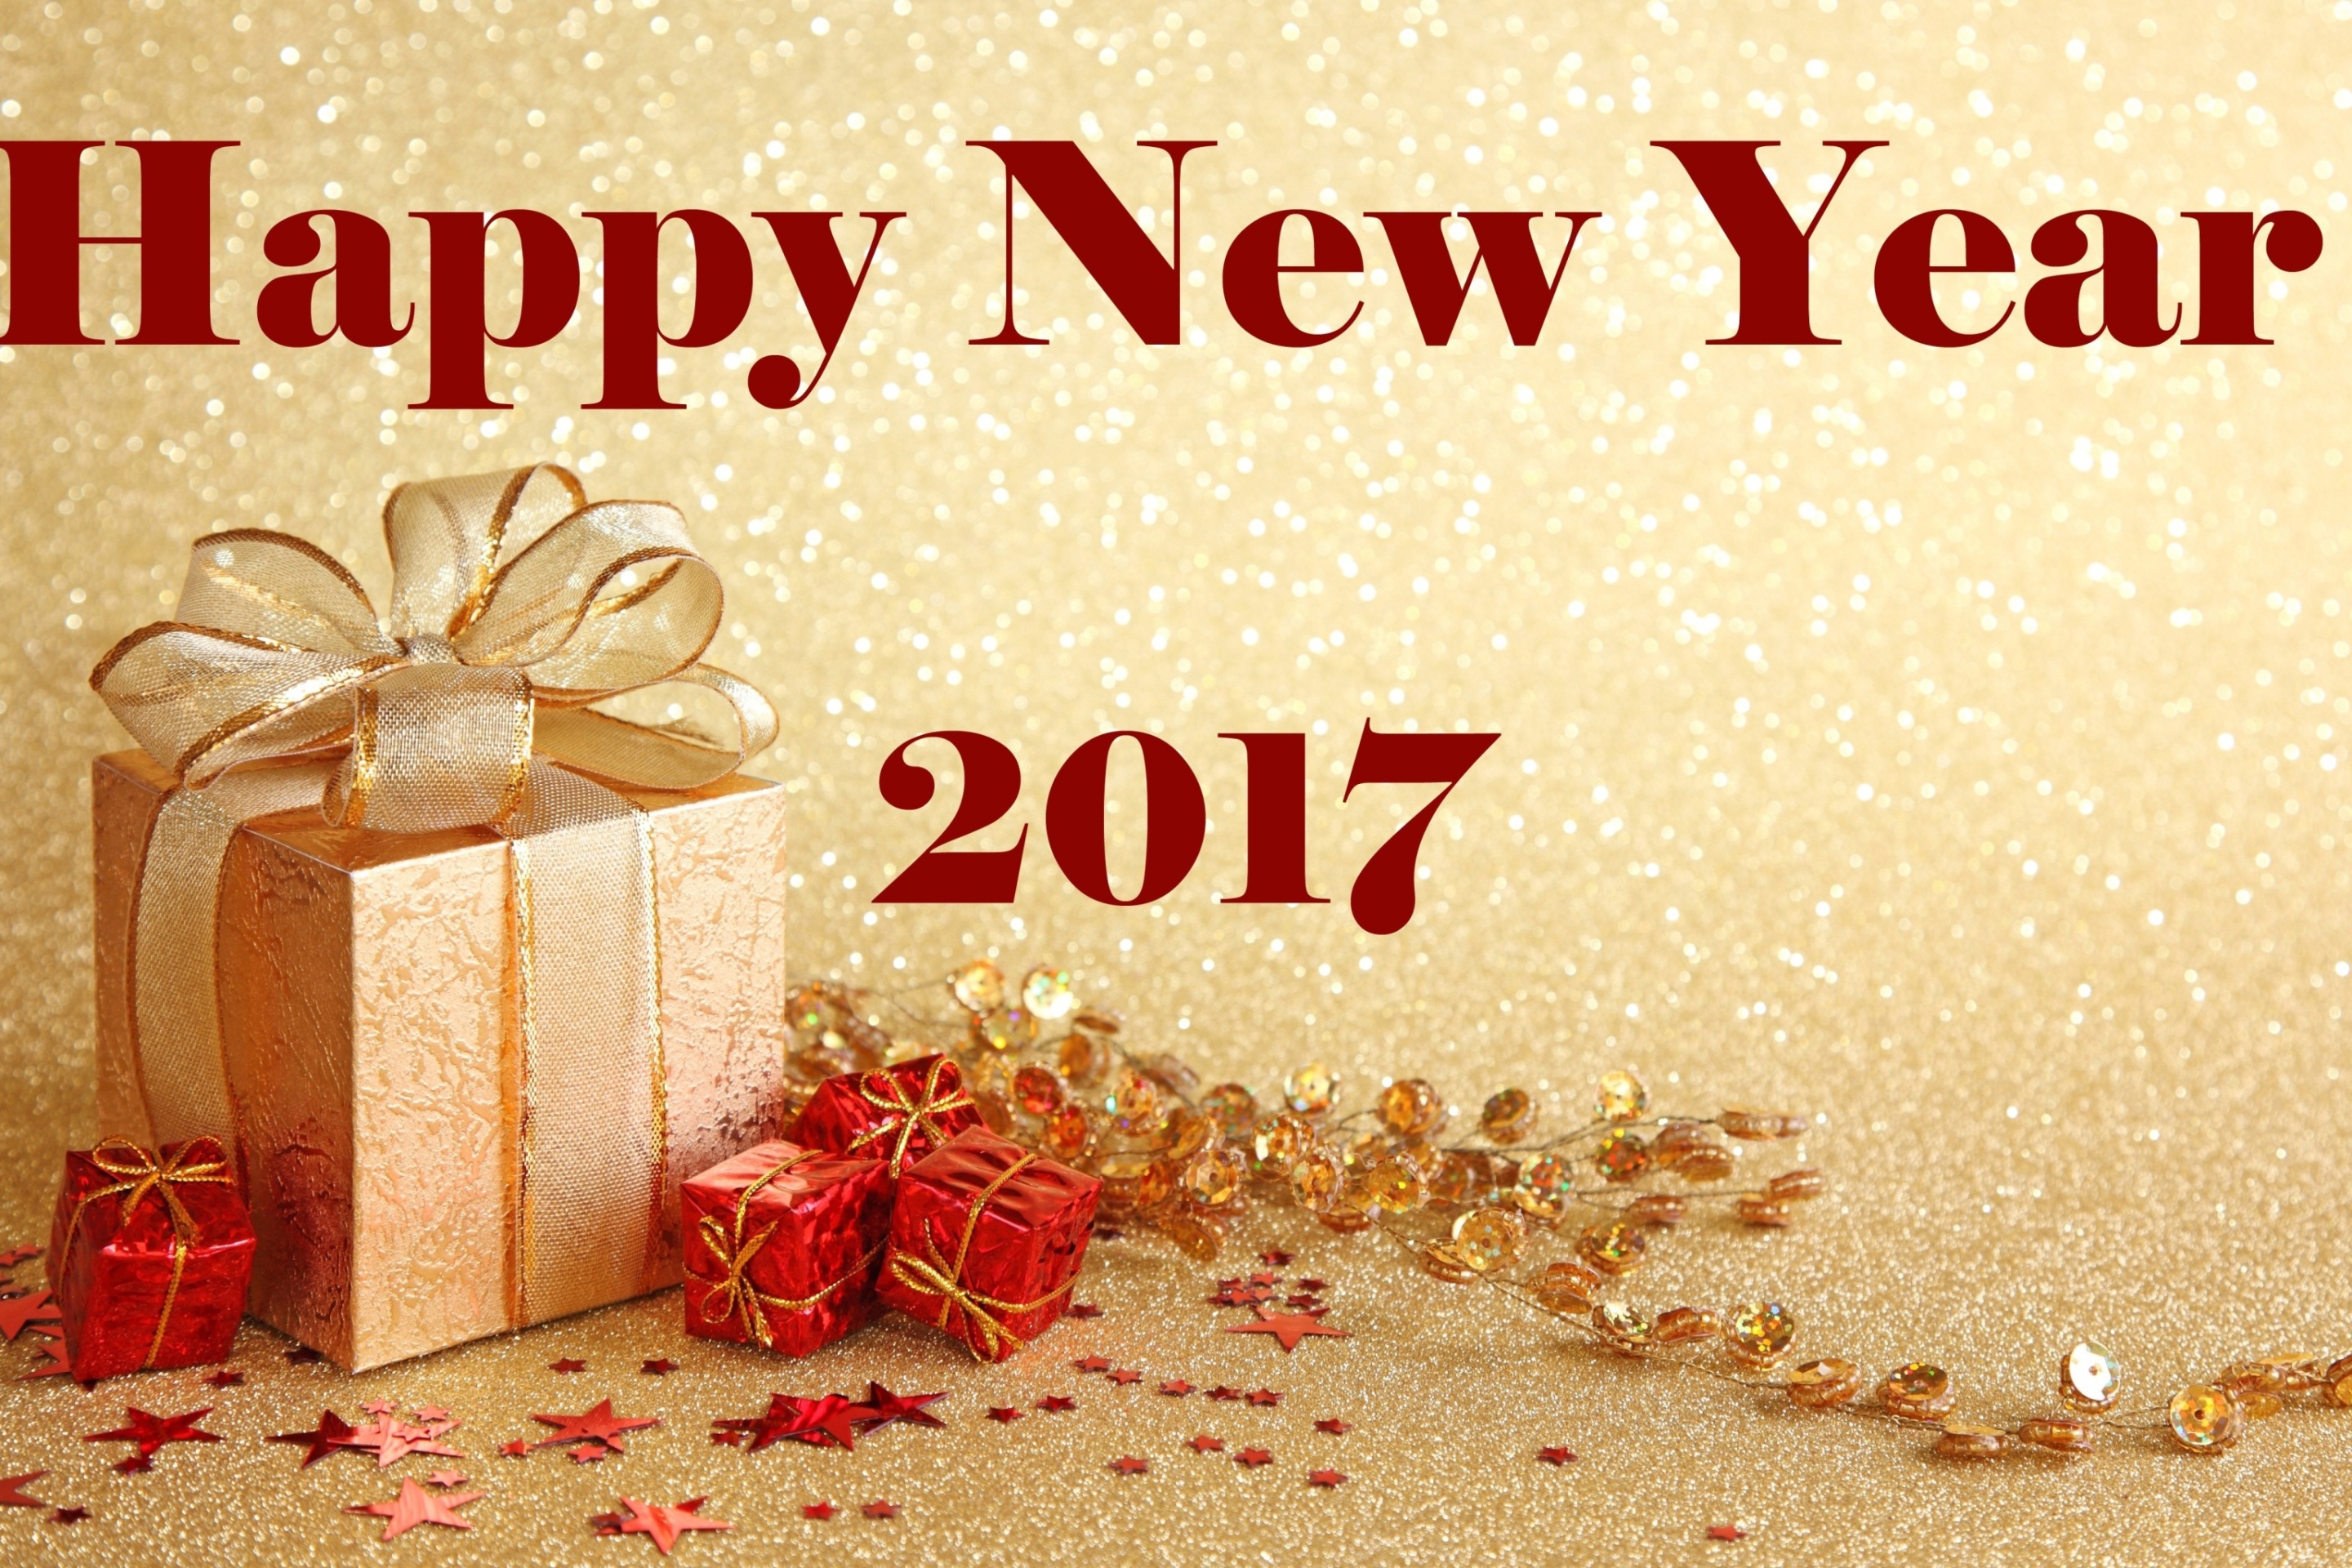 Happy New Year 2017 with Gifts screenshot #1 2880x1920